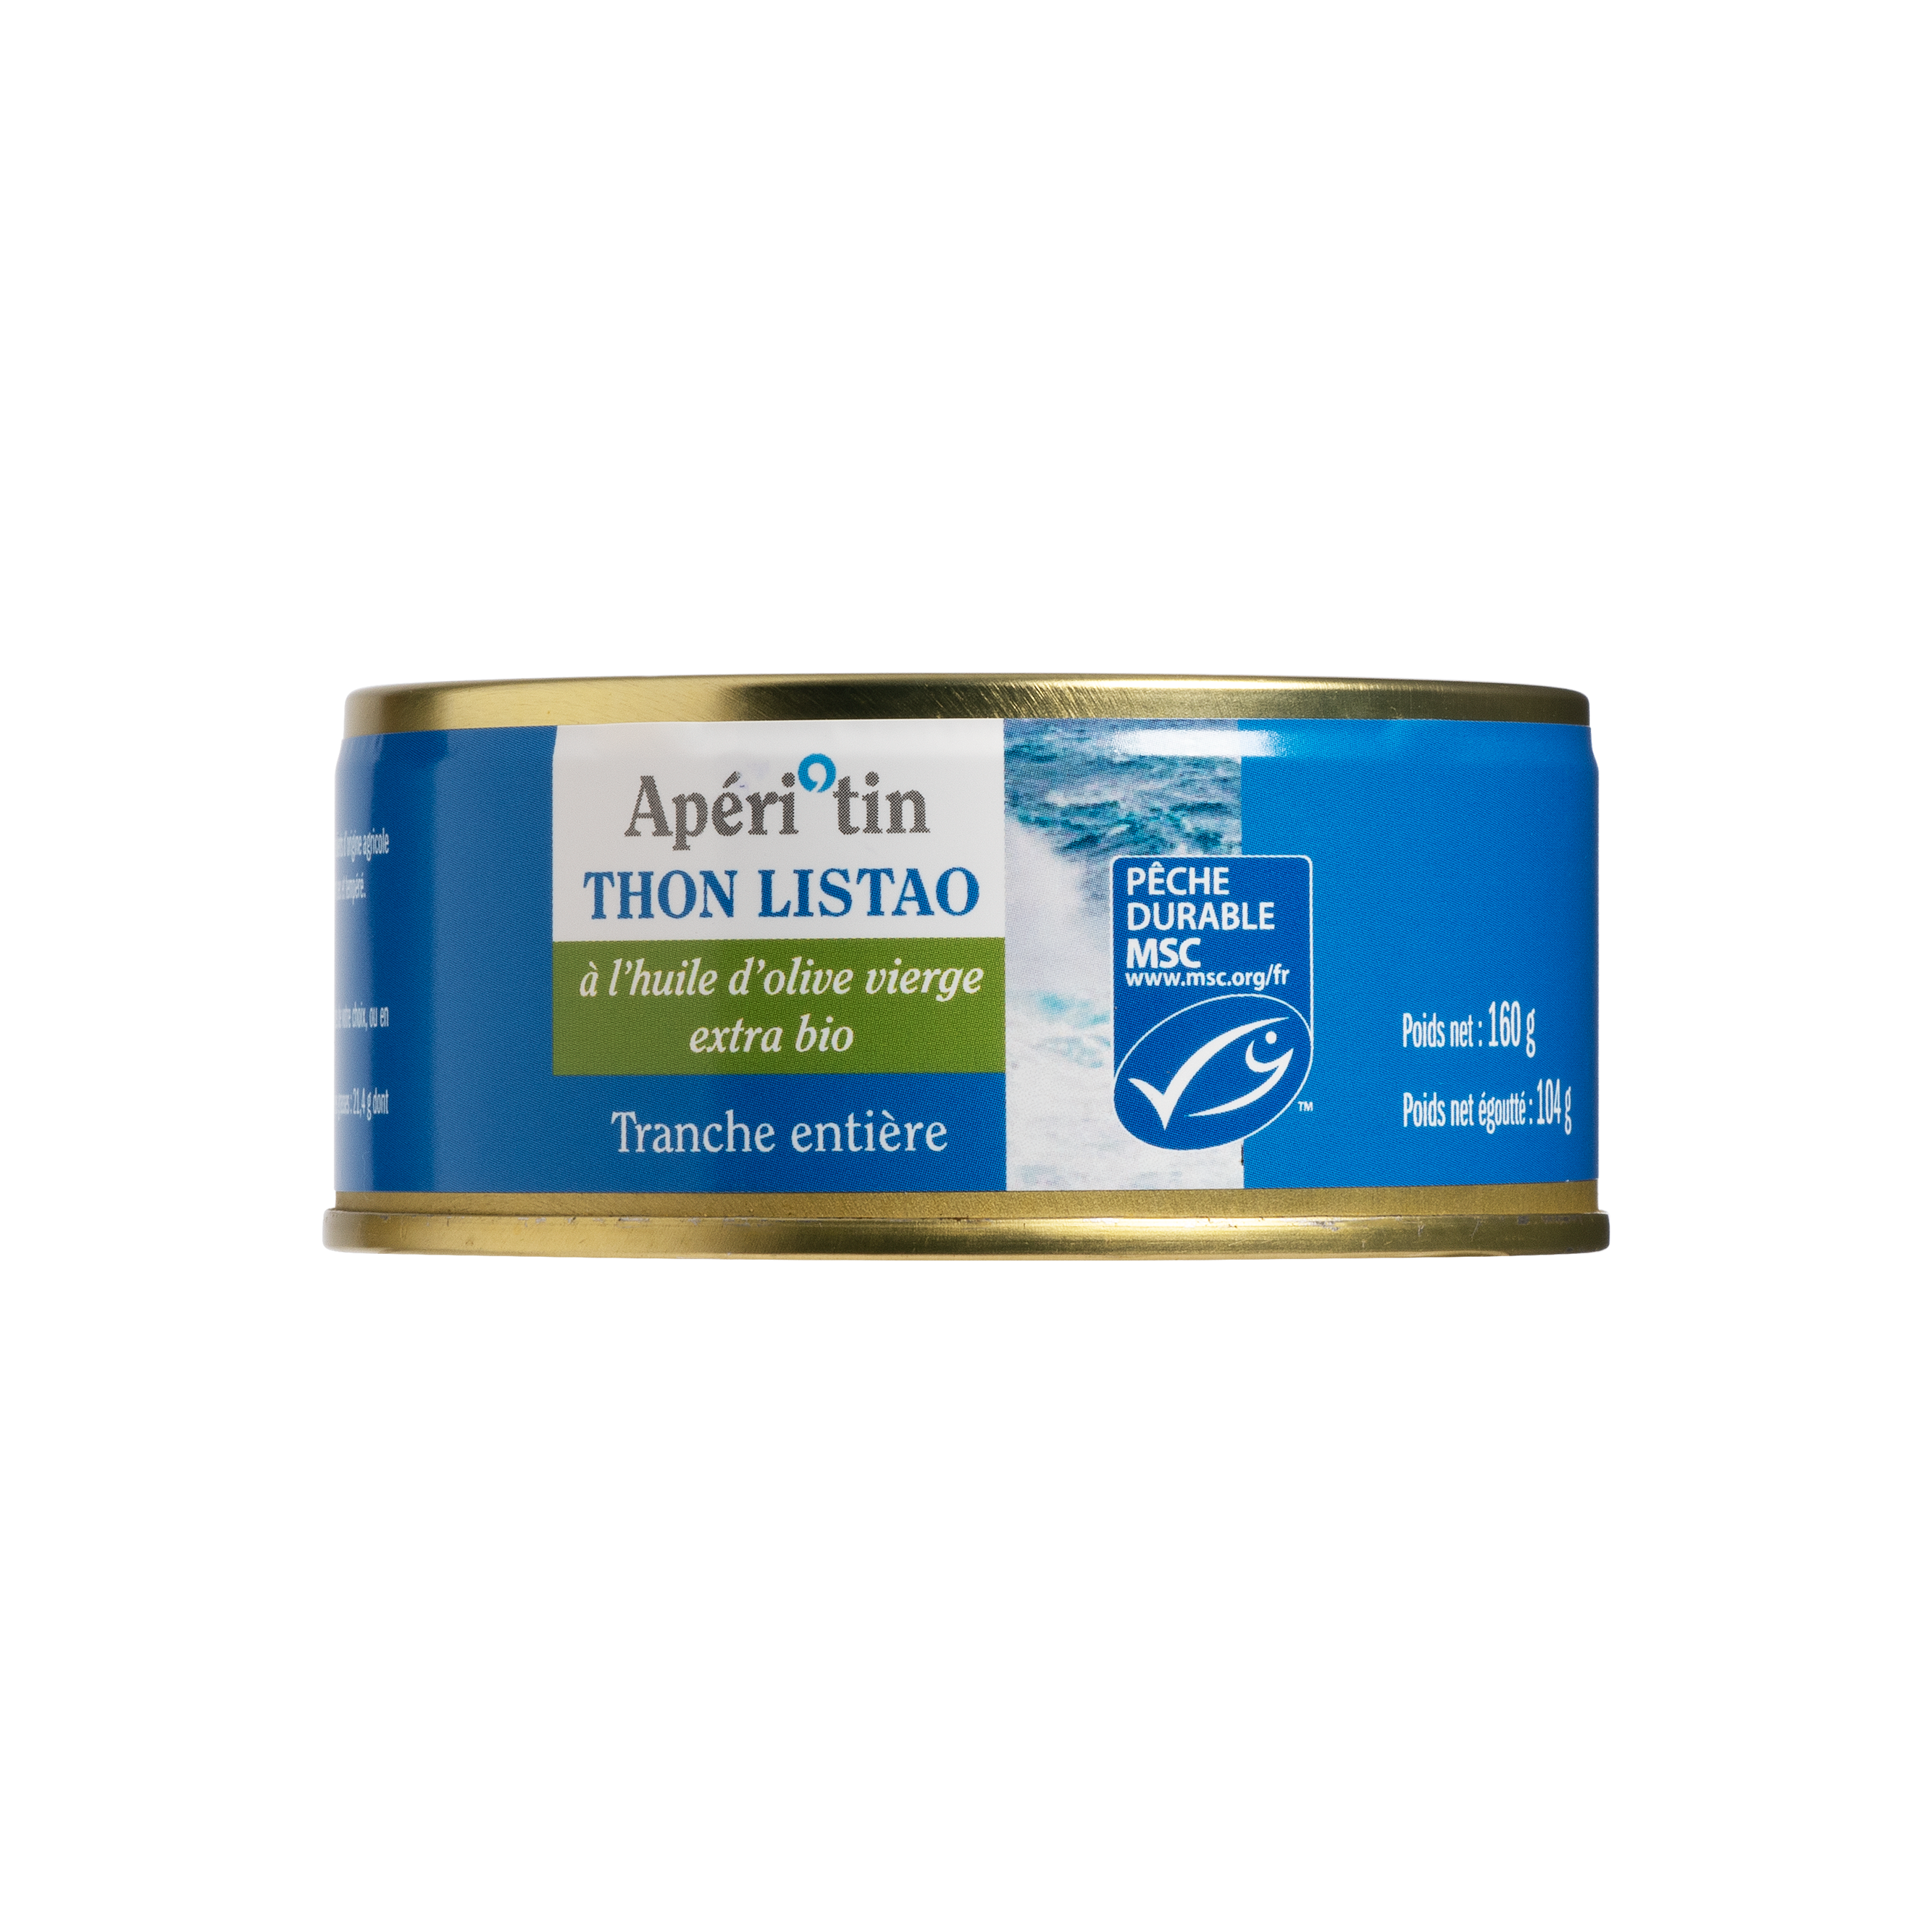 Thon Listao - A L'HUILE D'OLIVE EXTRA VIERGE BIO